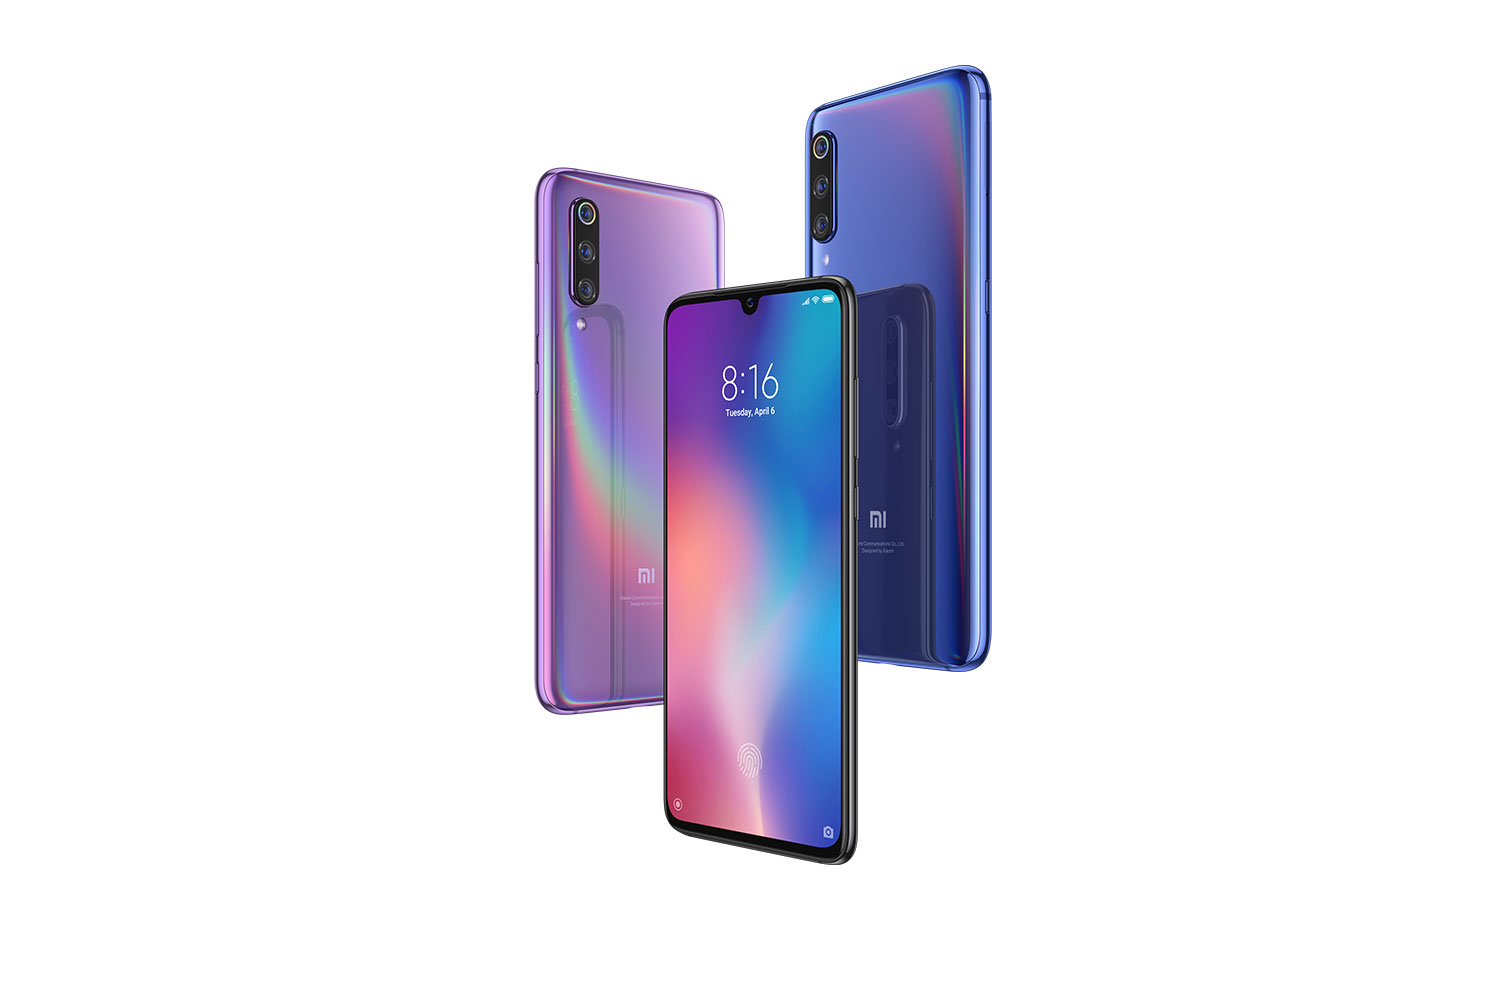 Xiaomi Mi 9 Now Available in Malaysia